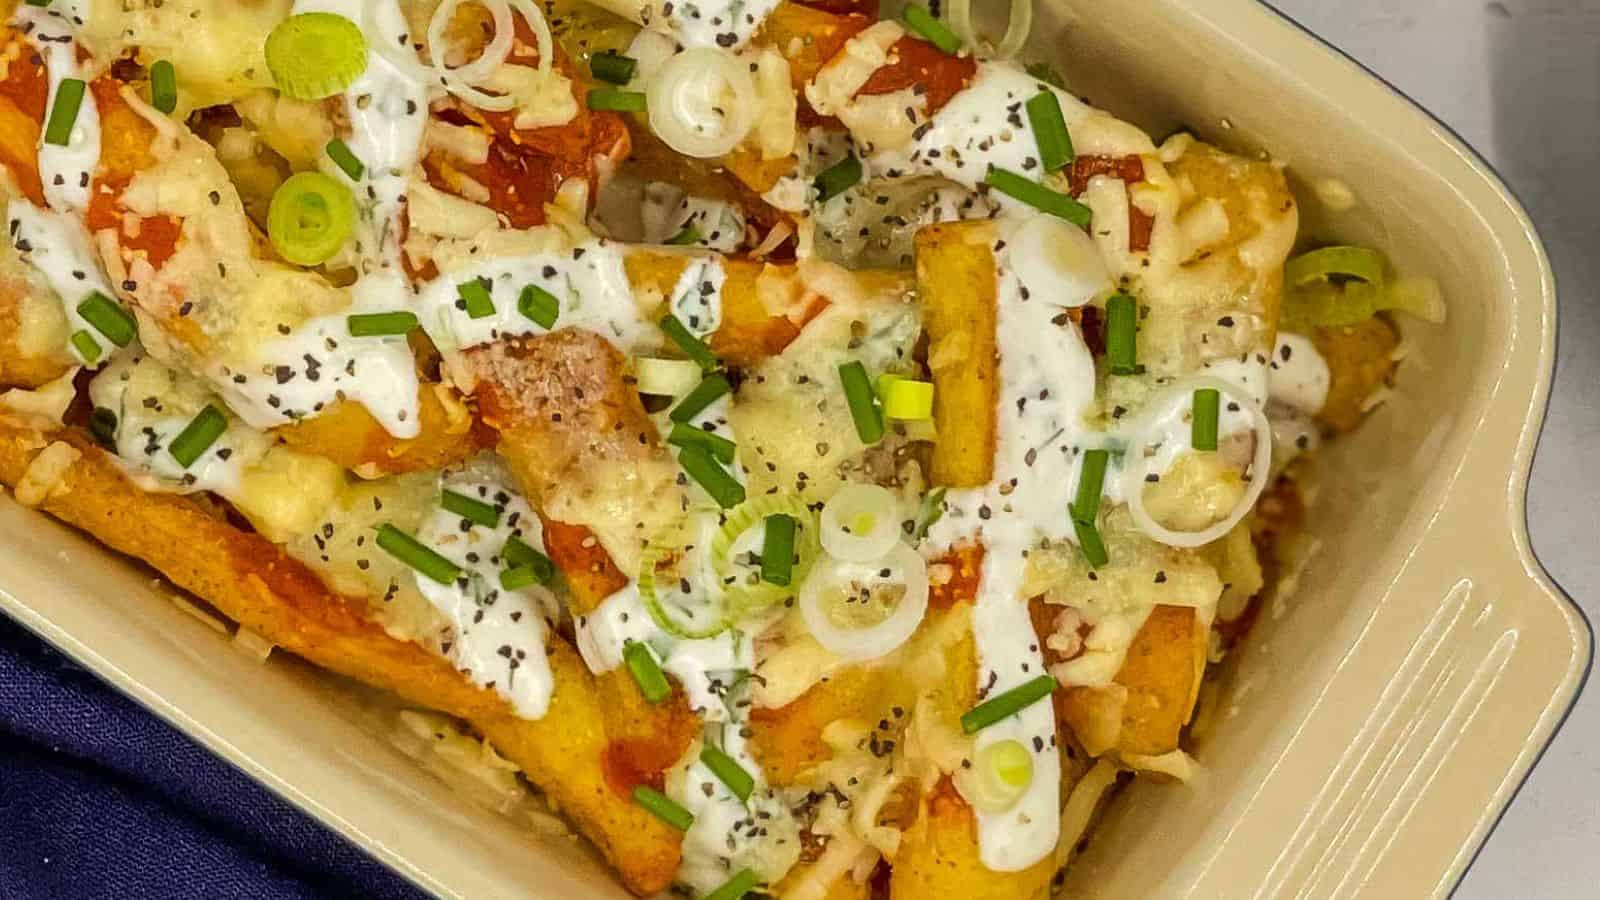 Buffalo Fries with ranch dressing on top in a casserole dish.